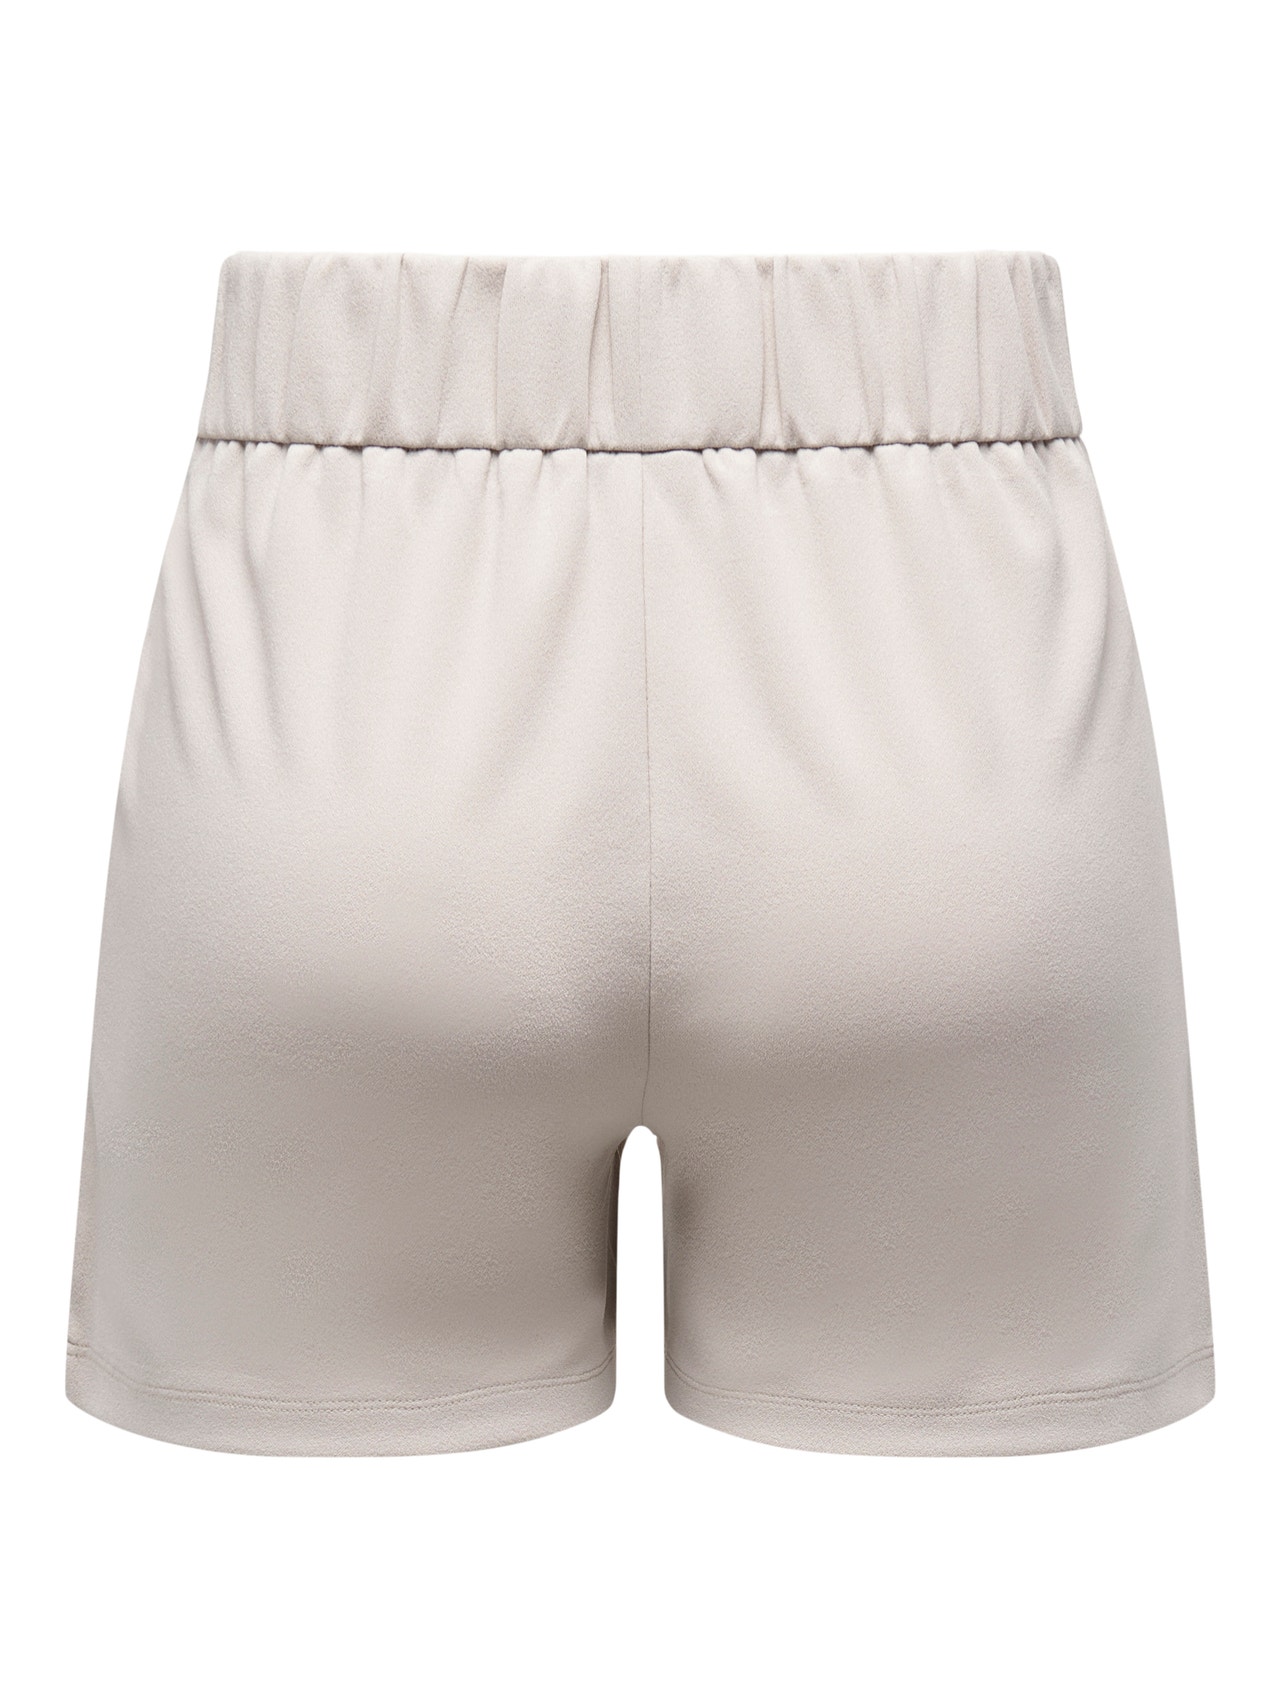 ONLY Unicolor Shorts -Chateau Gray - 15203098